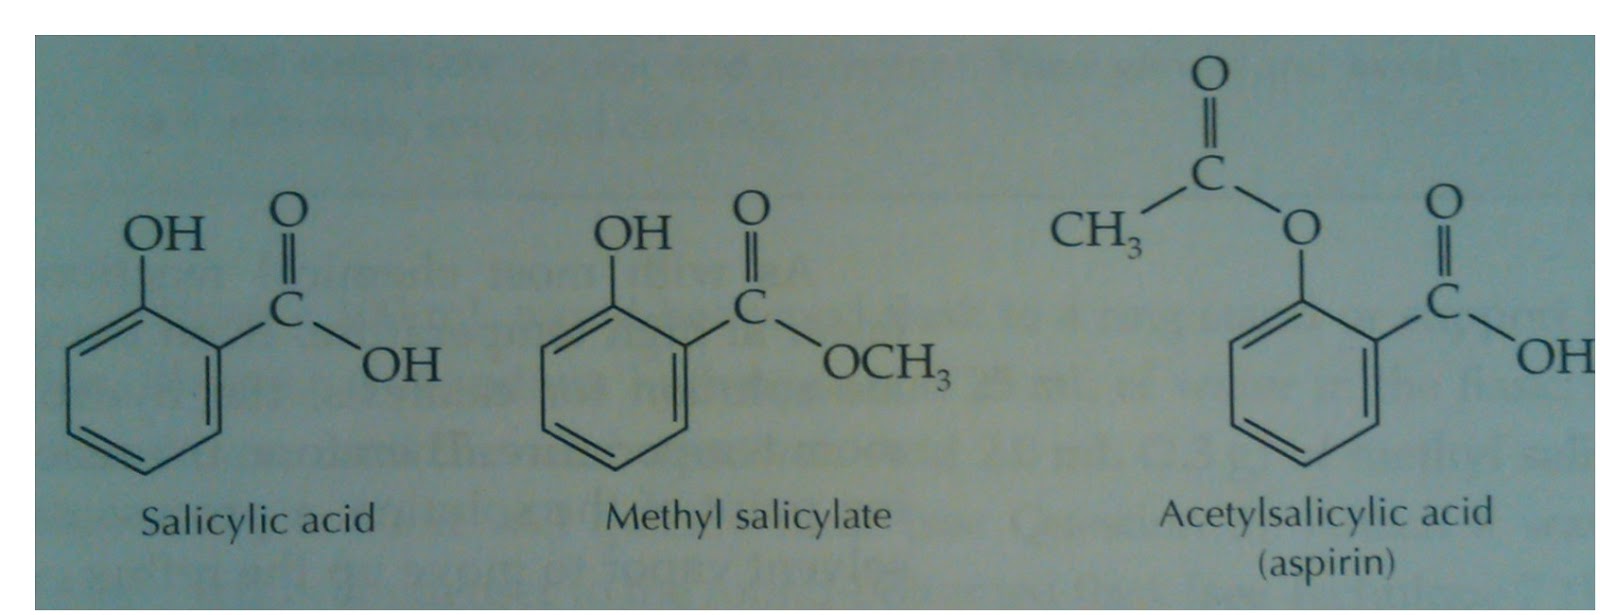 Synthesis of salicylic acid from wintergreen oil